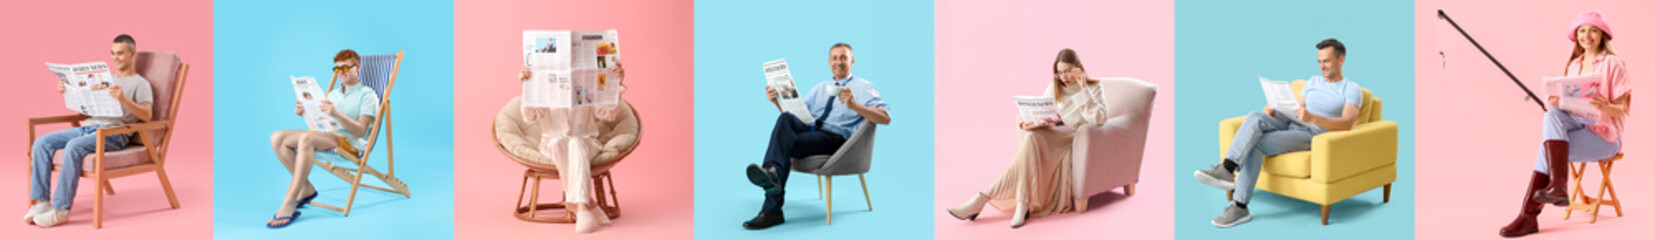 Collage of different people reading newspapers on pink and blue backgrounds